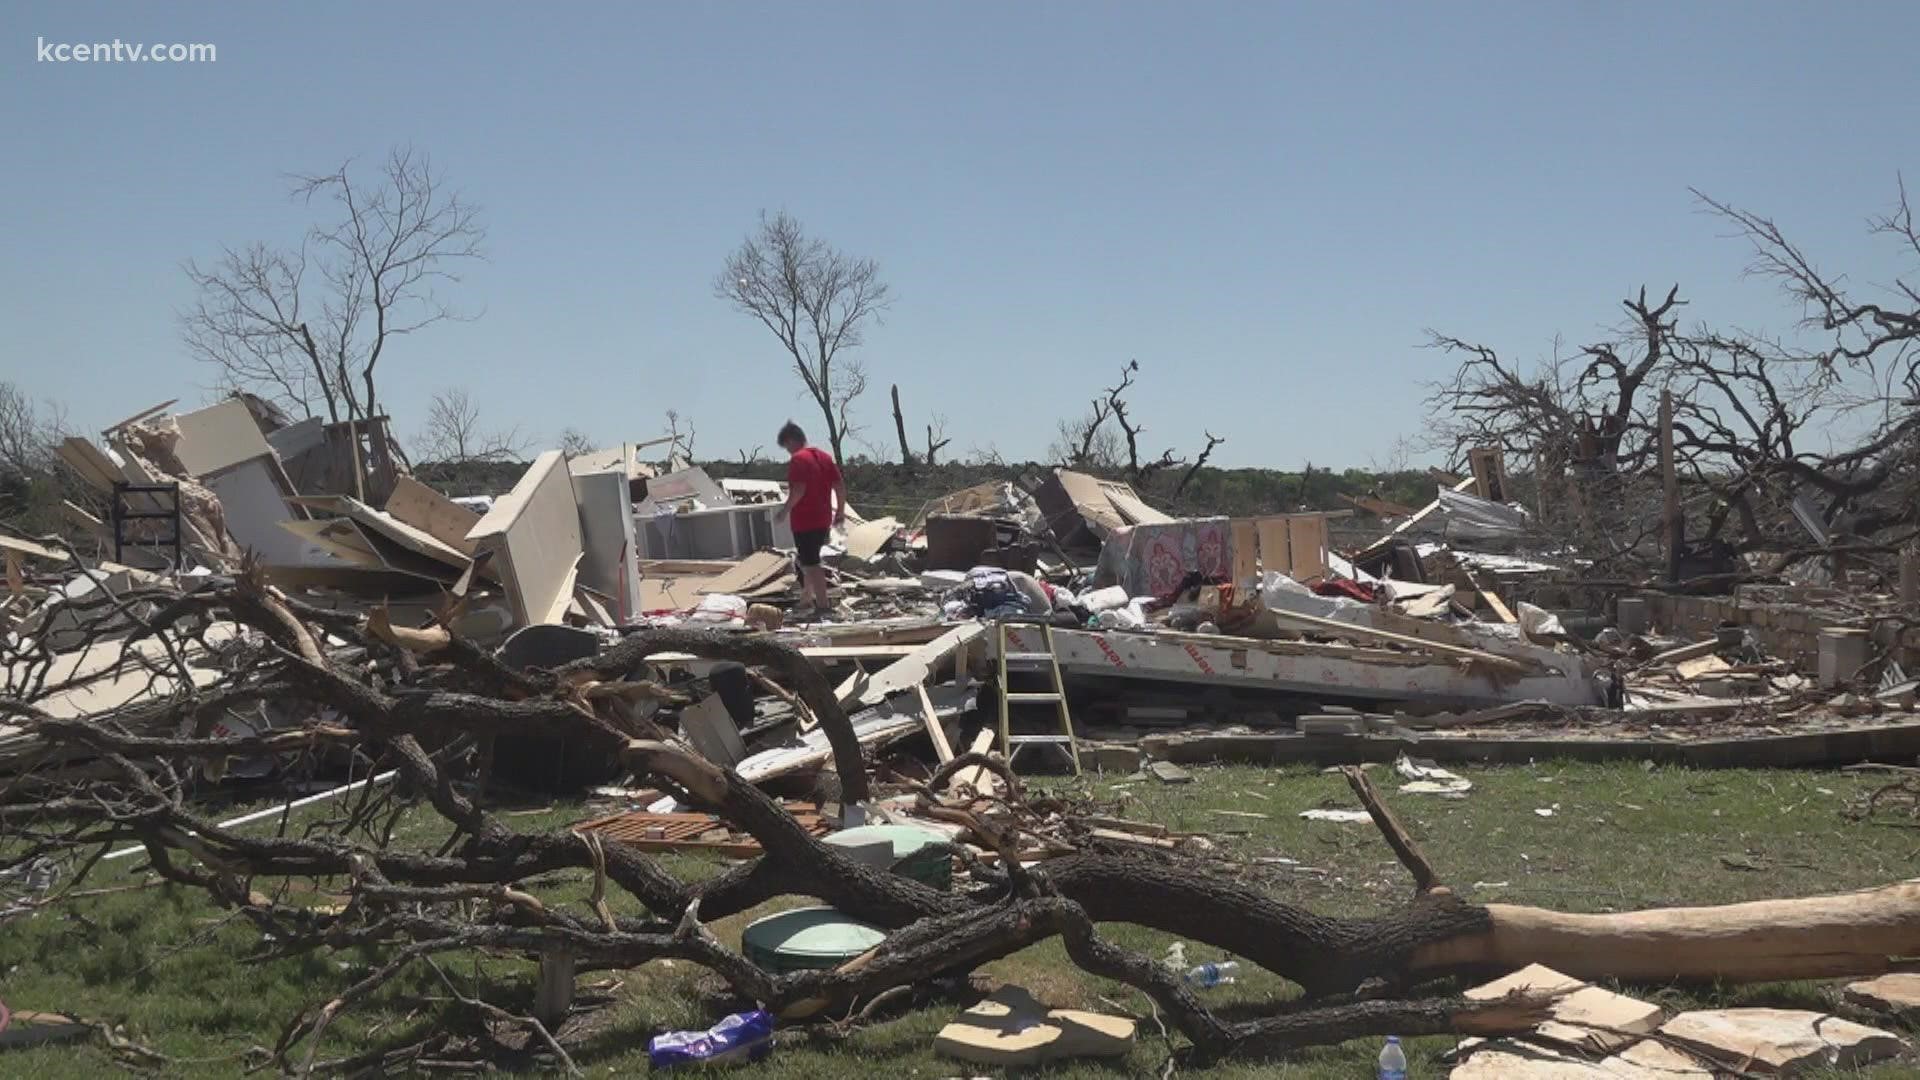 The family said they were inside the home while the tornado picked it up and destroyed everything.